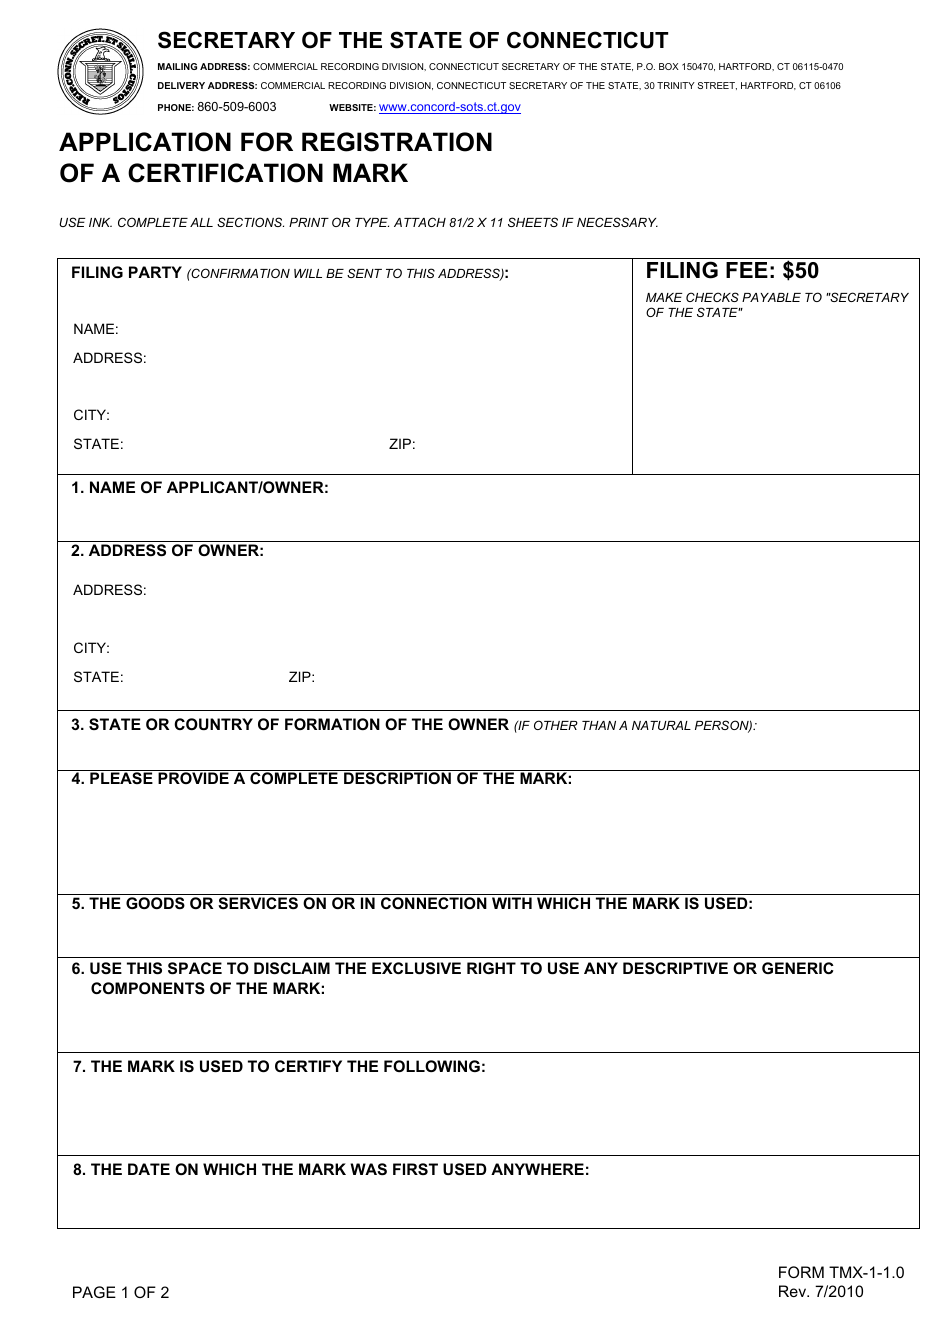 Form TMX-1-1.0 Application for Registration of a Certification Mark - Connecticut, Page 1